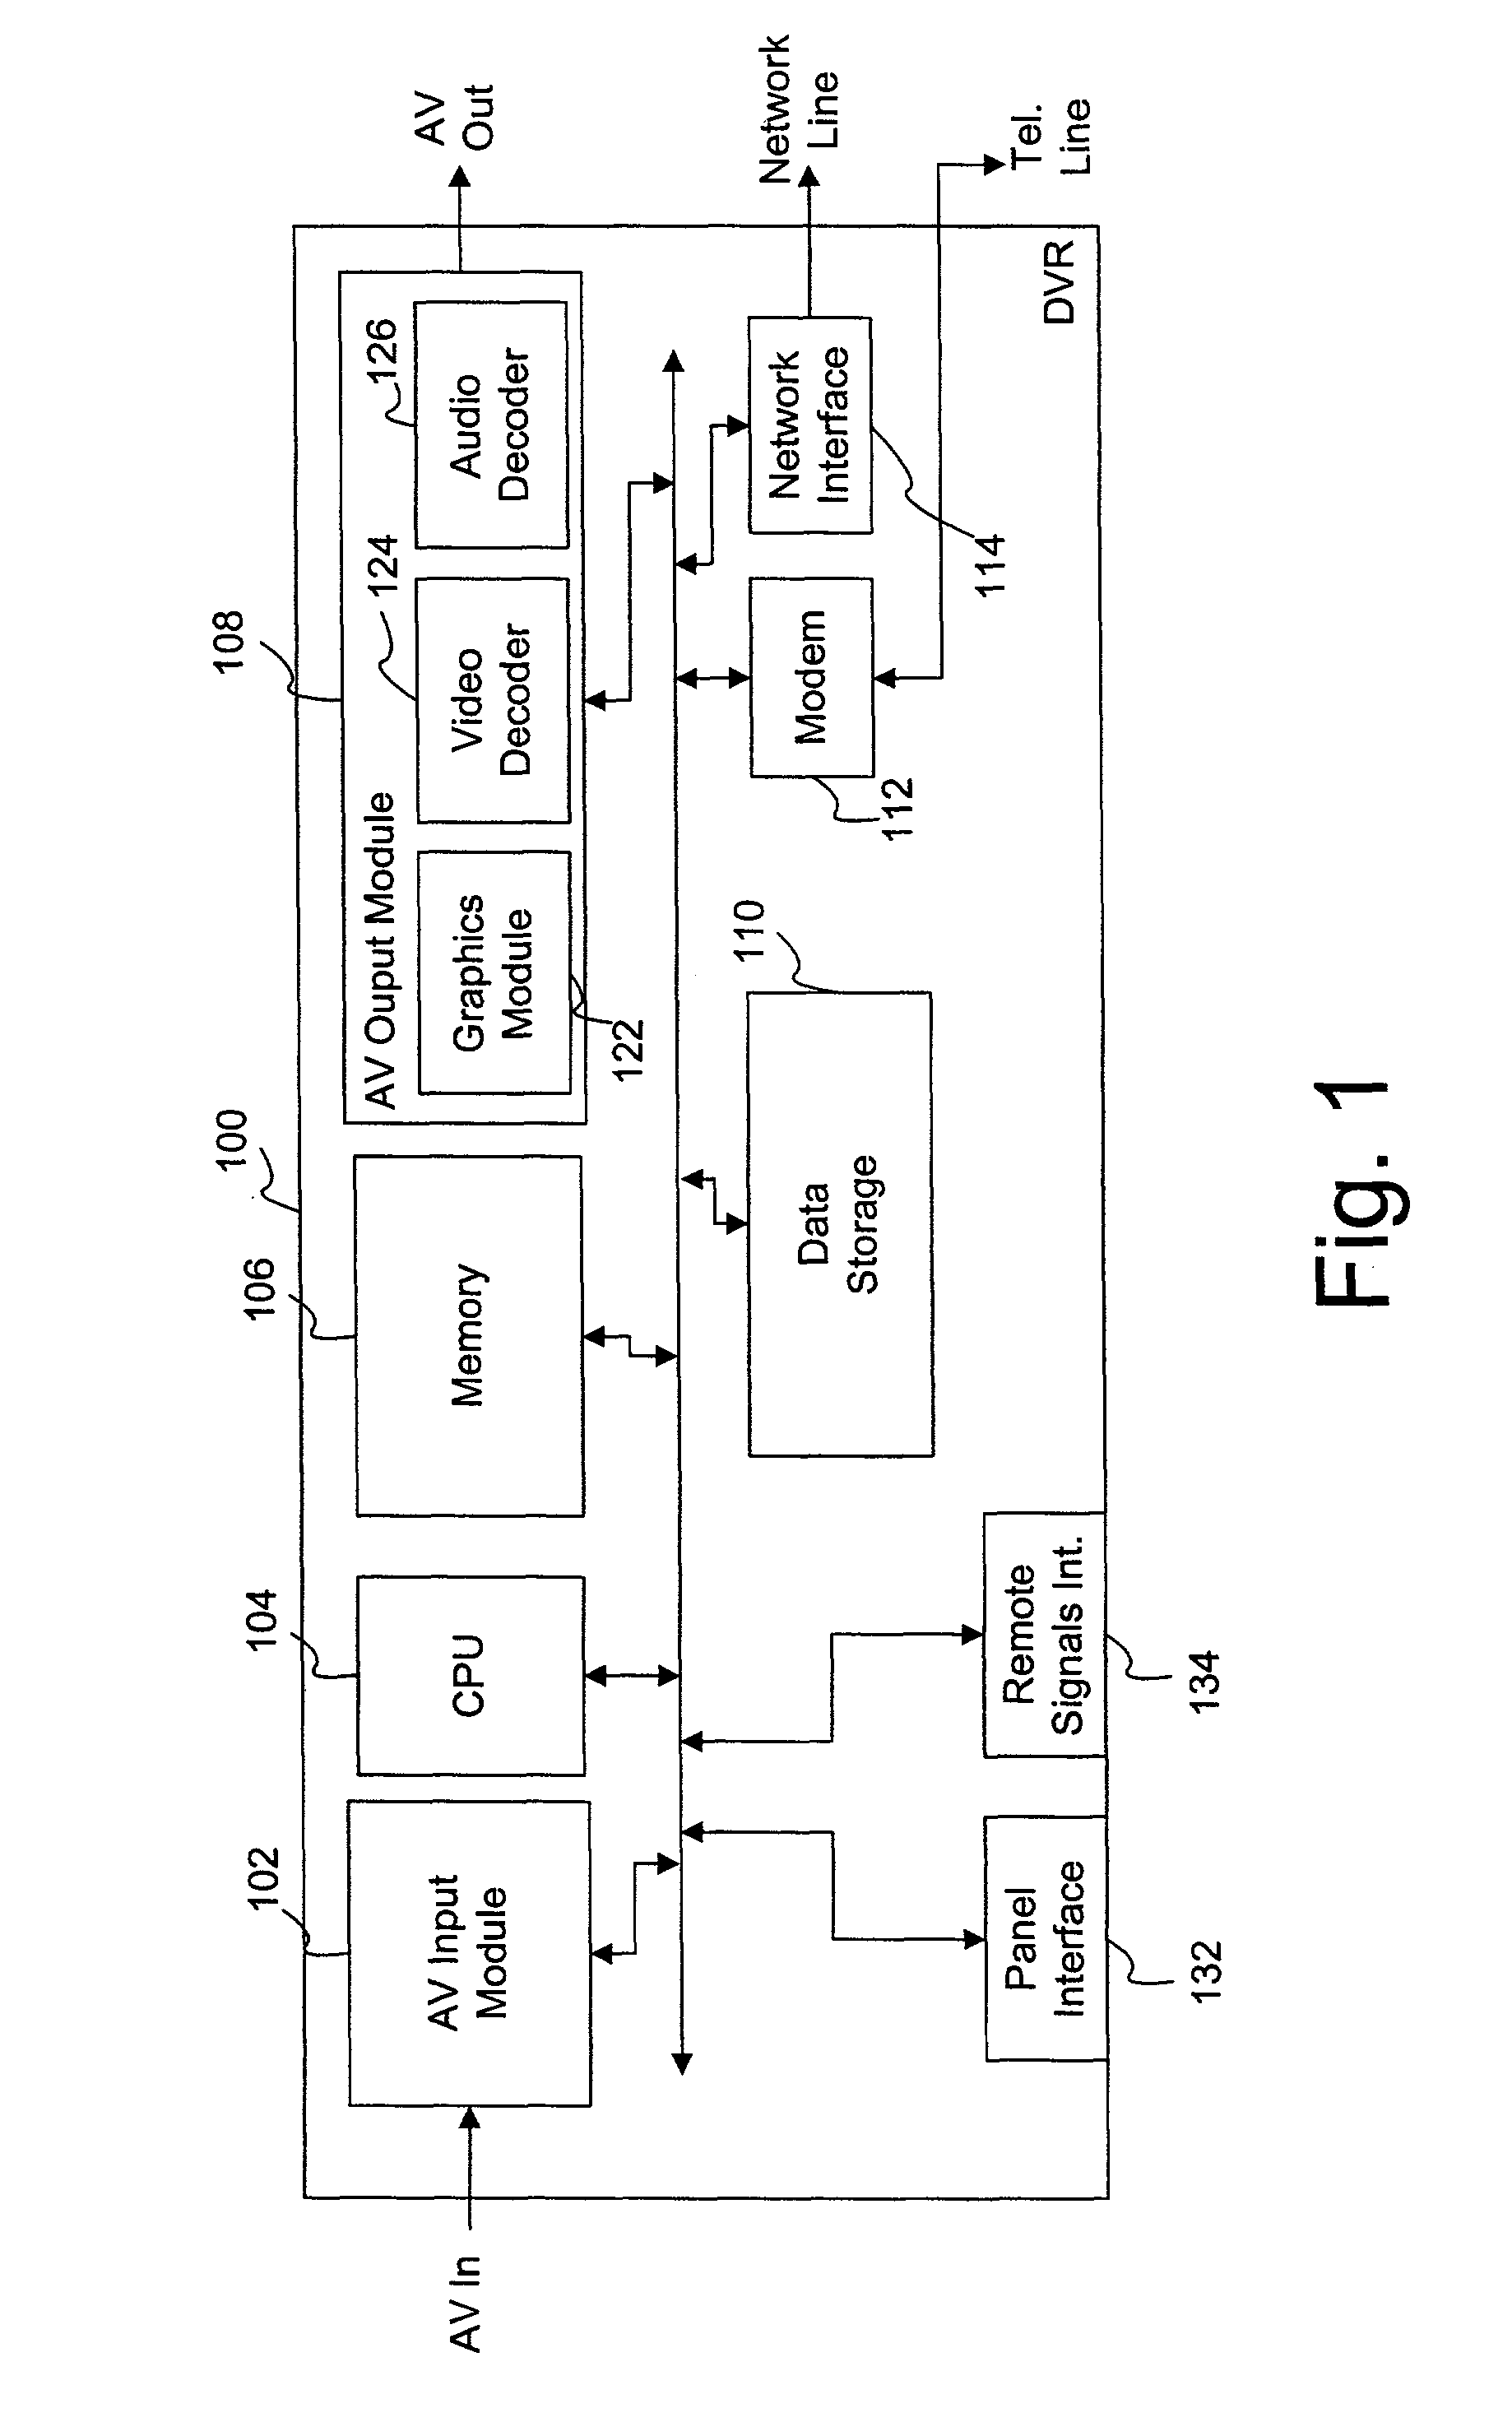 Interface for resolving recording conflicts with network devices